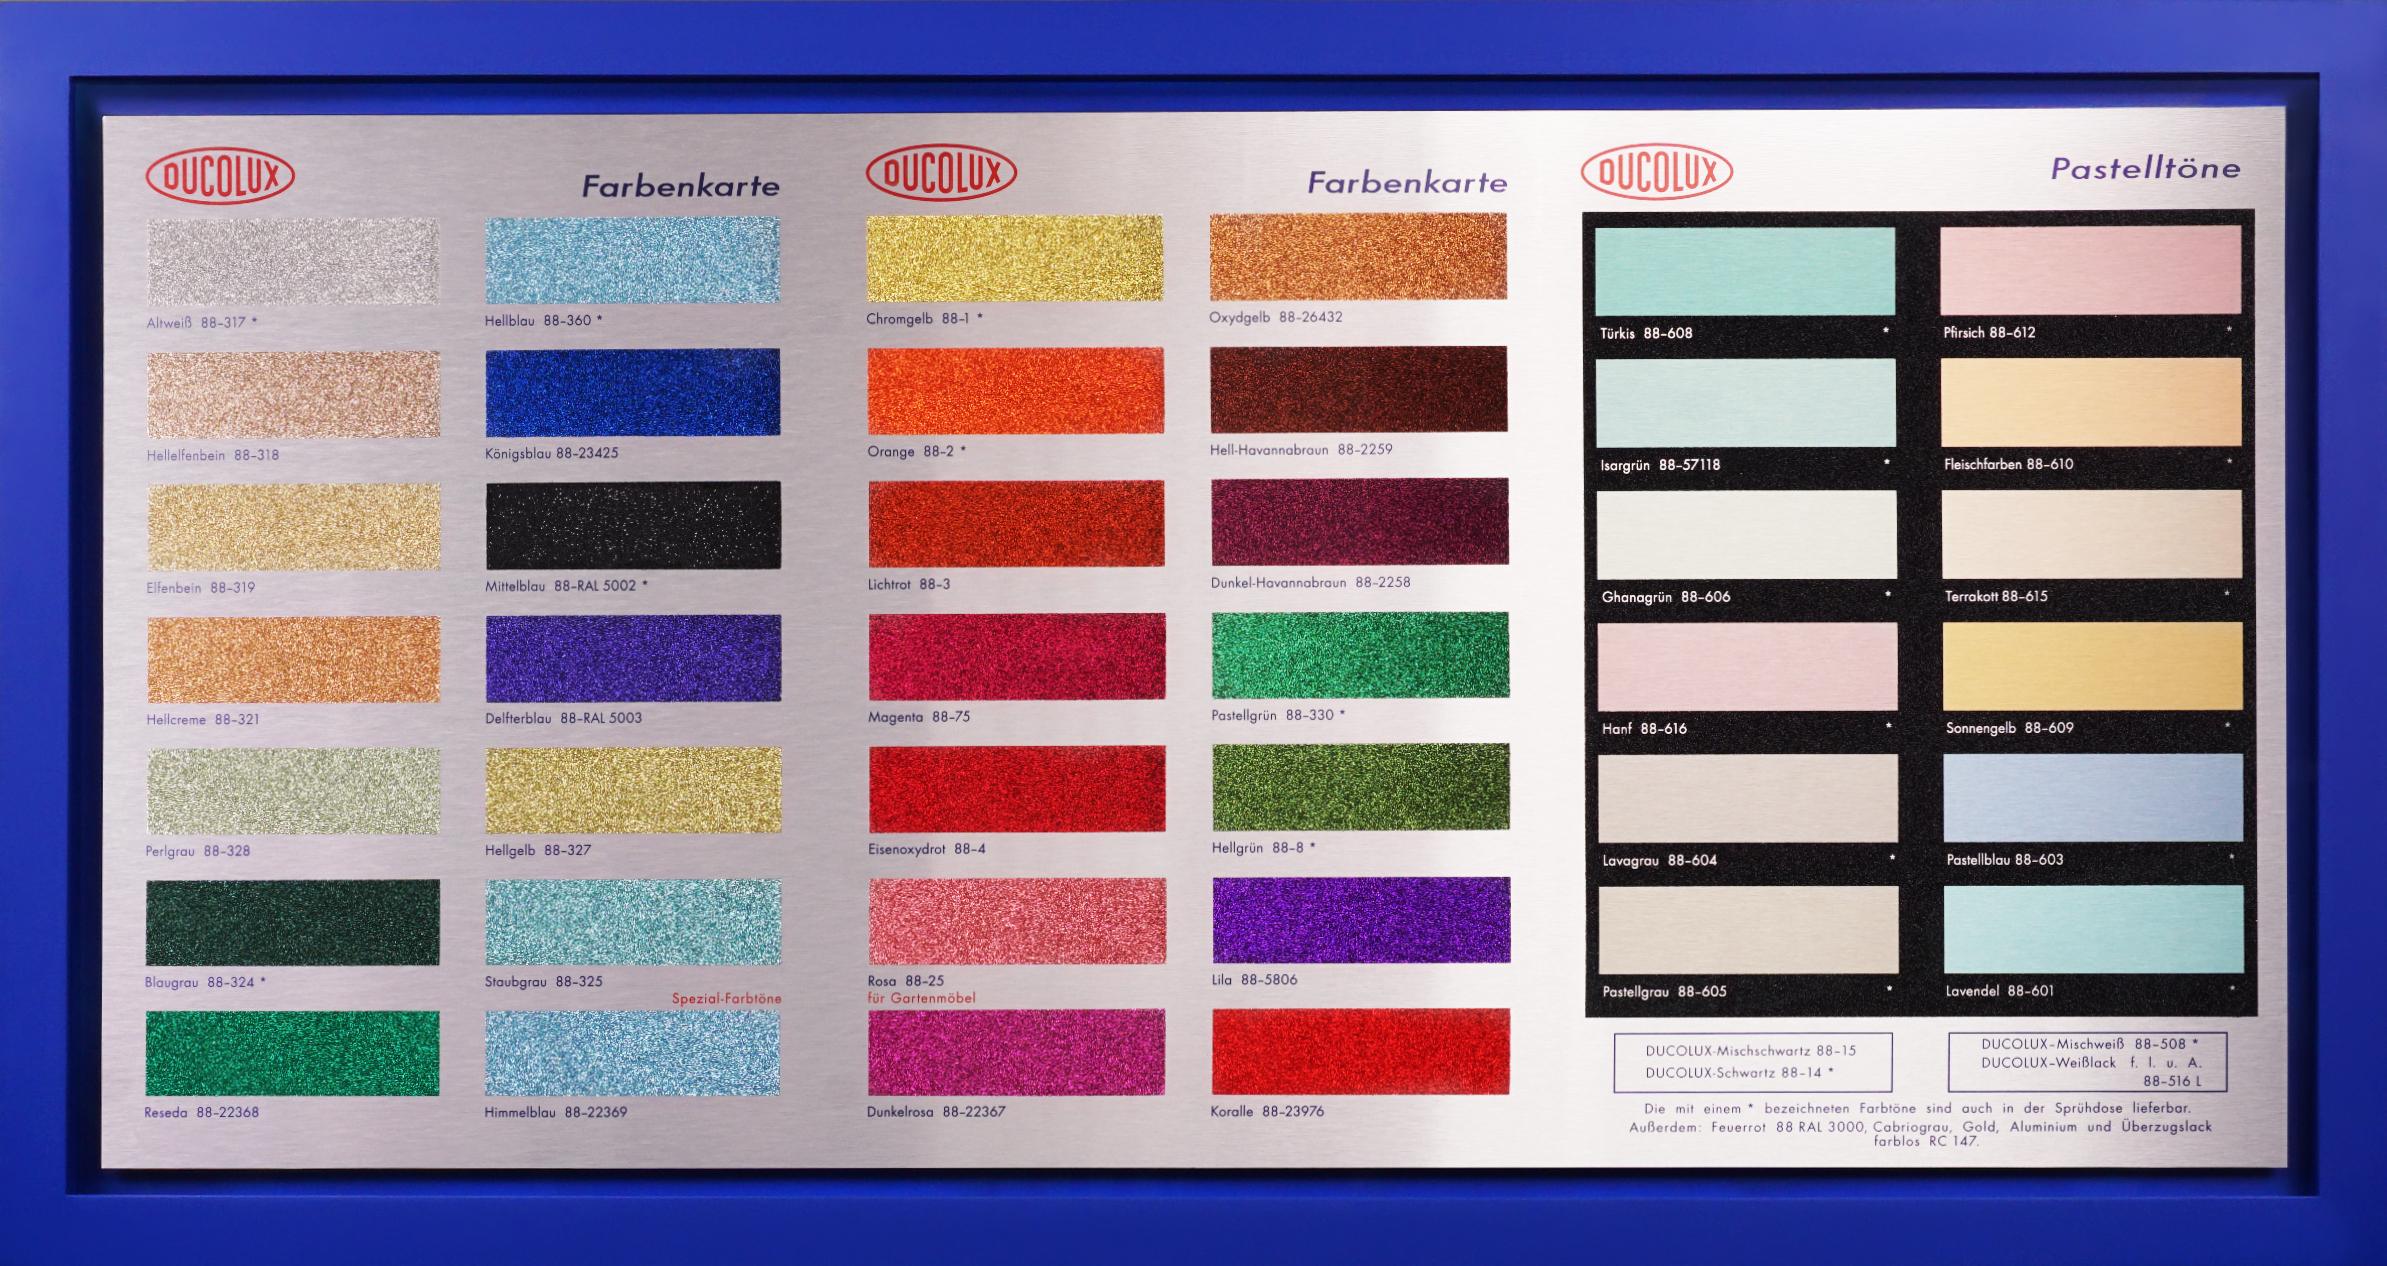 'Colour Chart' Aluminum Panel Silkscreen with Glitter, 2017 is signed and numbered by the Artist on verso. Published by HENI in 2017. Edition of 250 + 8AP, number #152 of edition.

The glittering contemporary pop-art ‘Colour Chart’ by Damien Hirst